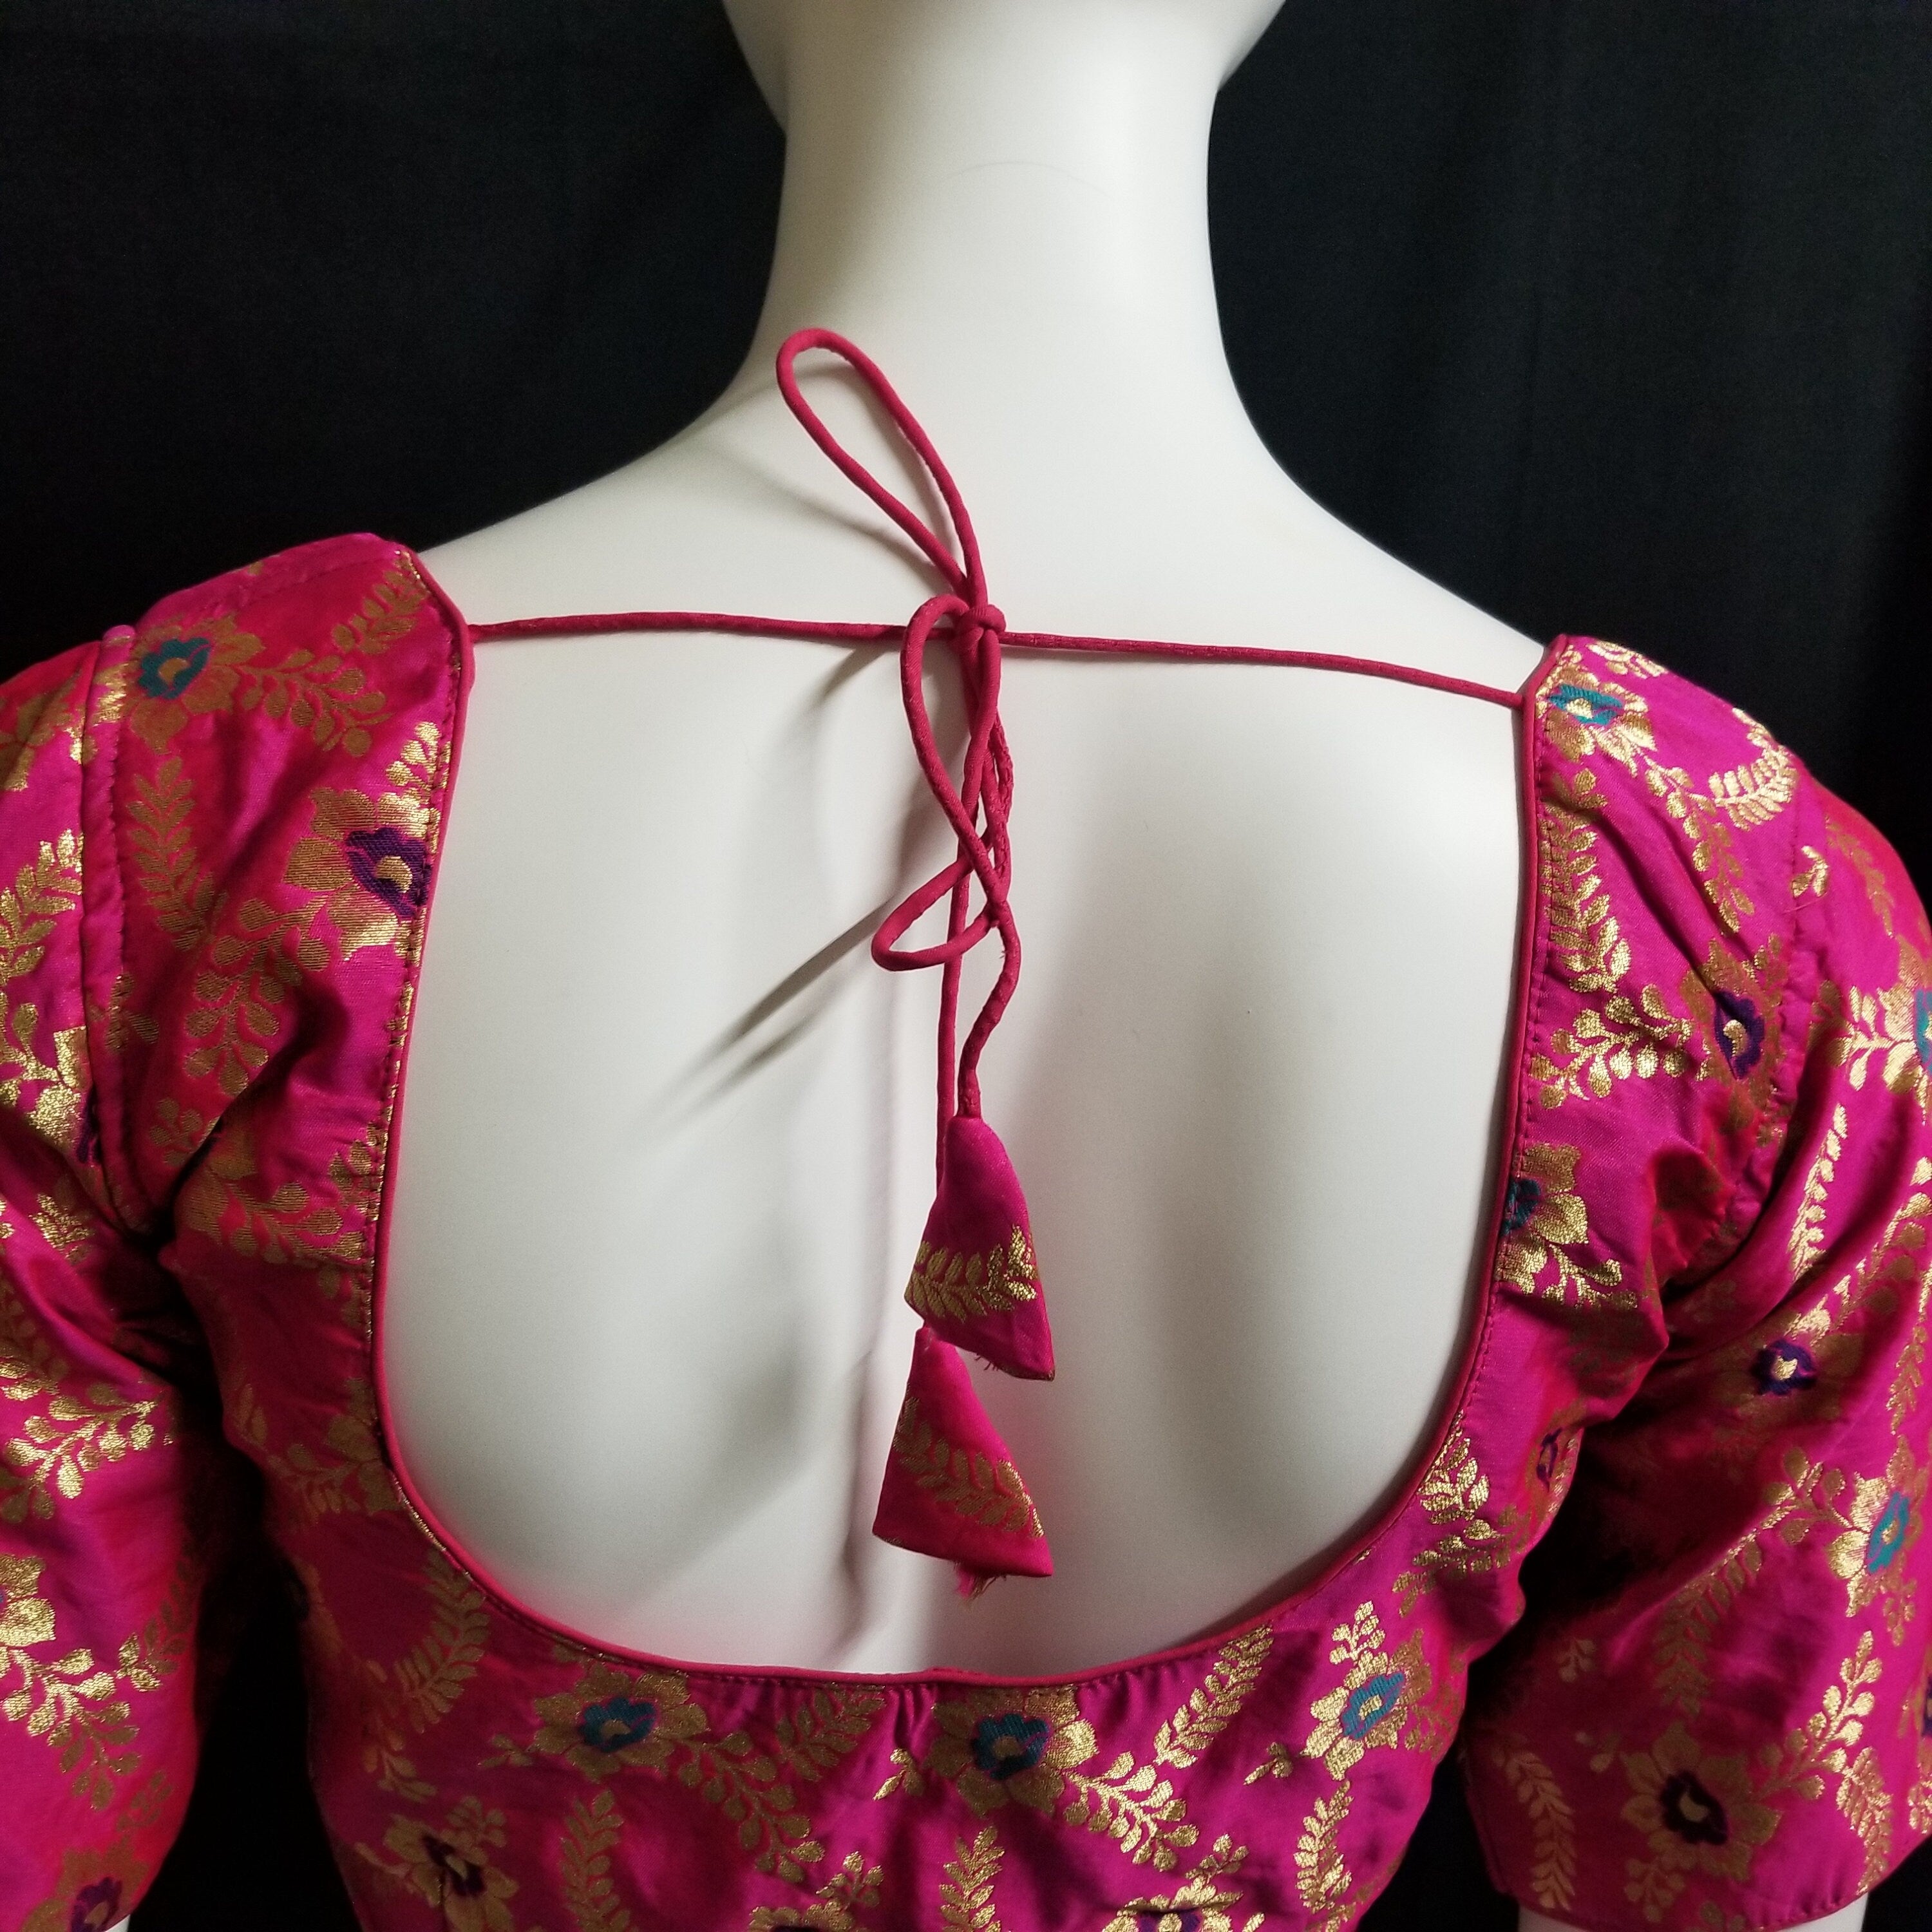 Readymade Saree Blouse - Pink with gold Silk Blouse with padded Blouse - size 36" (alter 34, 38)